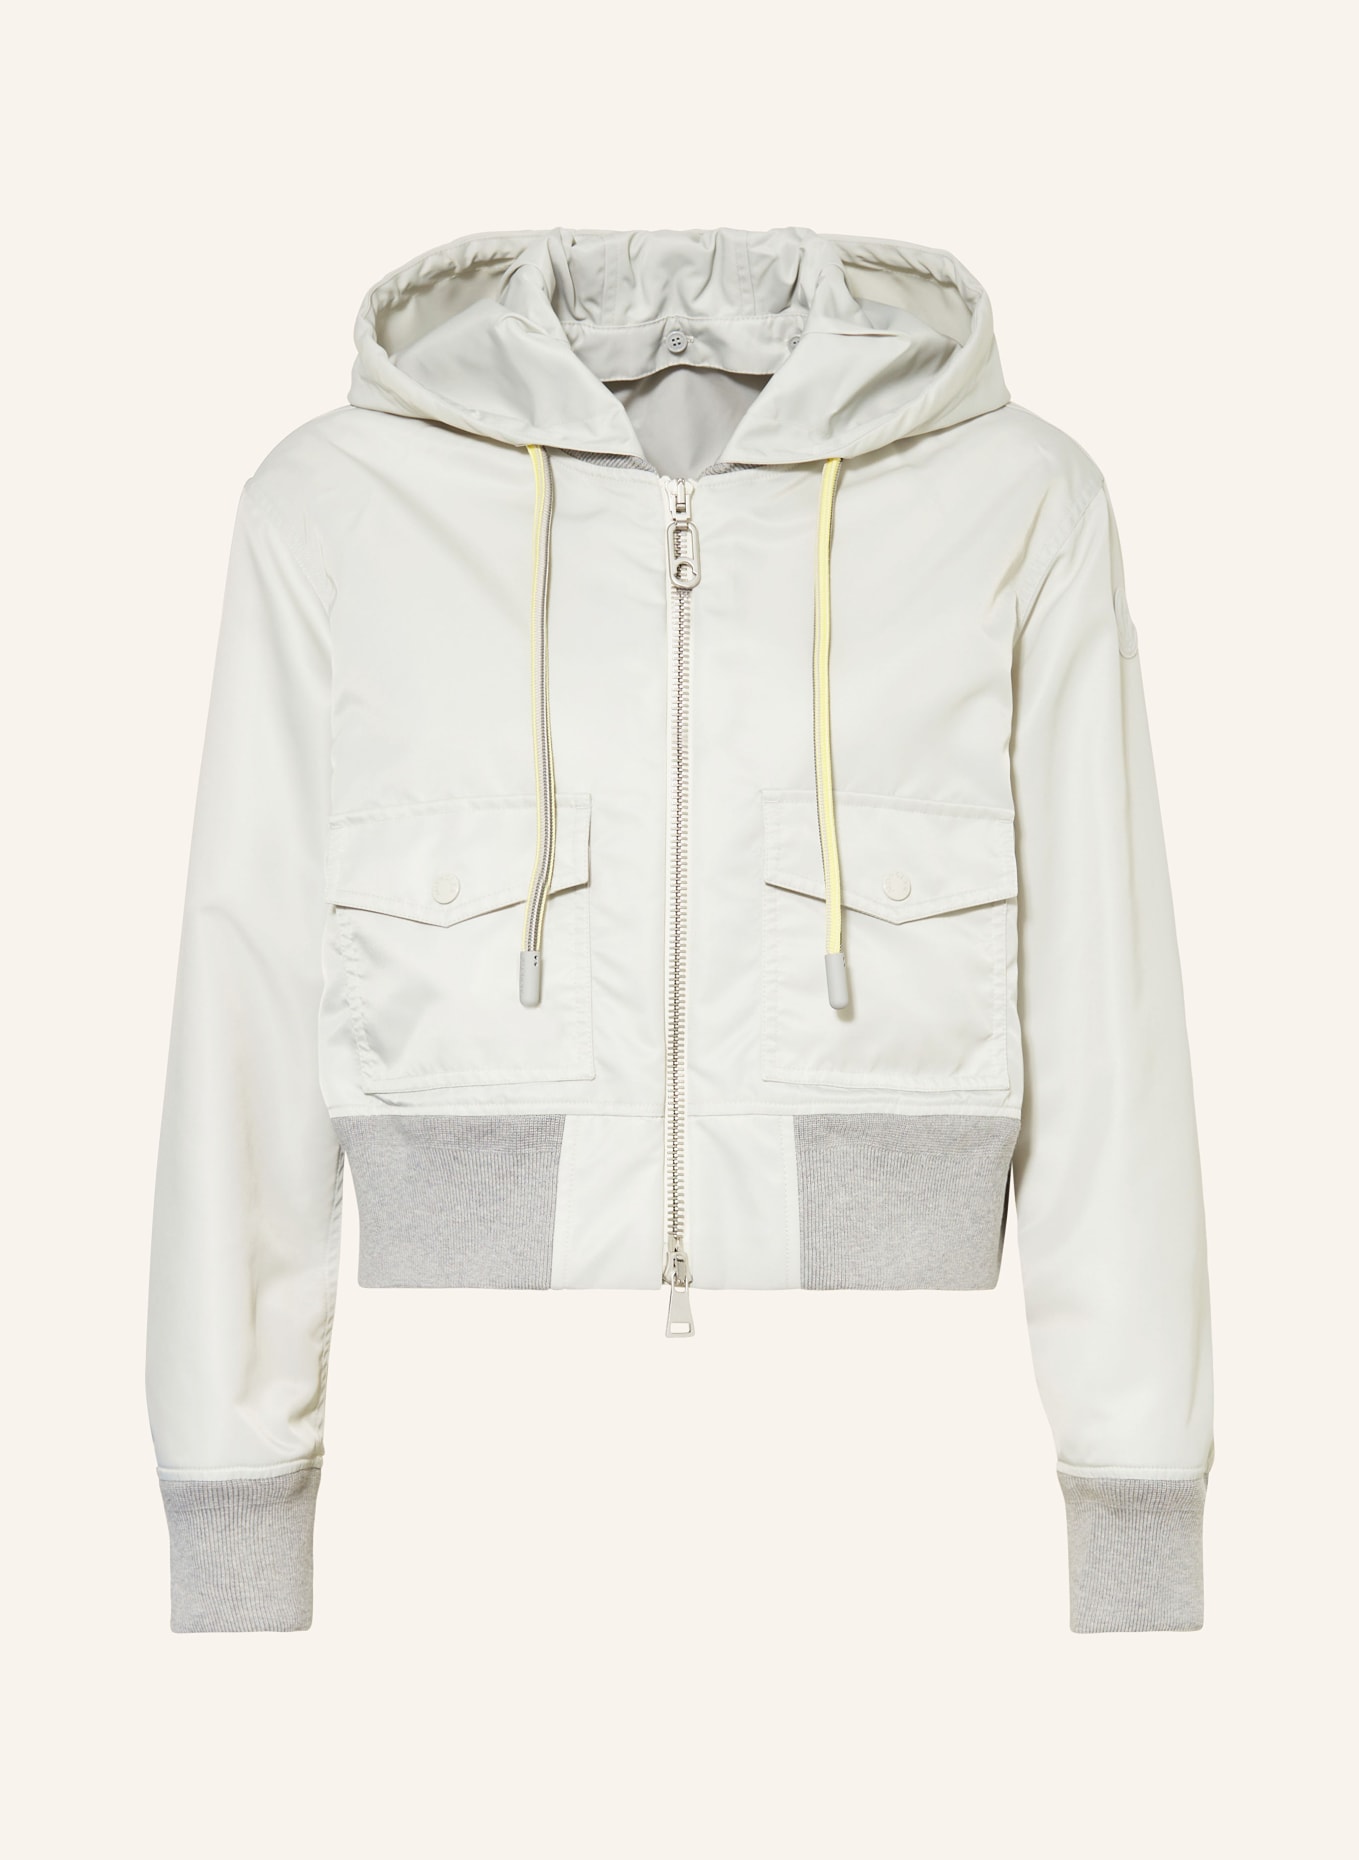 MONCLER Cropped bomber jacket BRISEO with detachable hood, Color: LIGHT GRAY (Image 1)